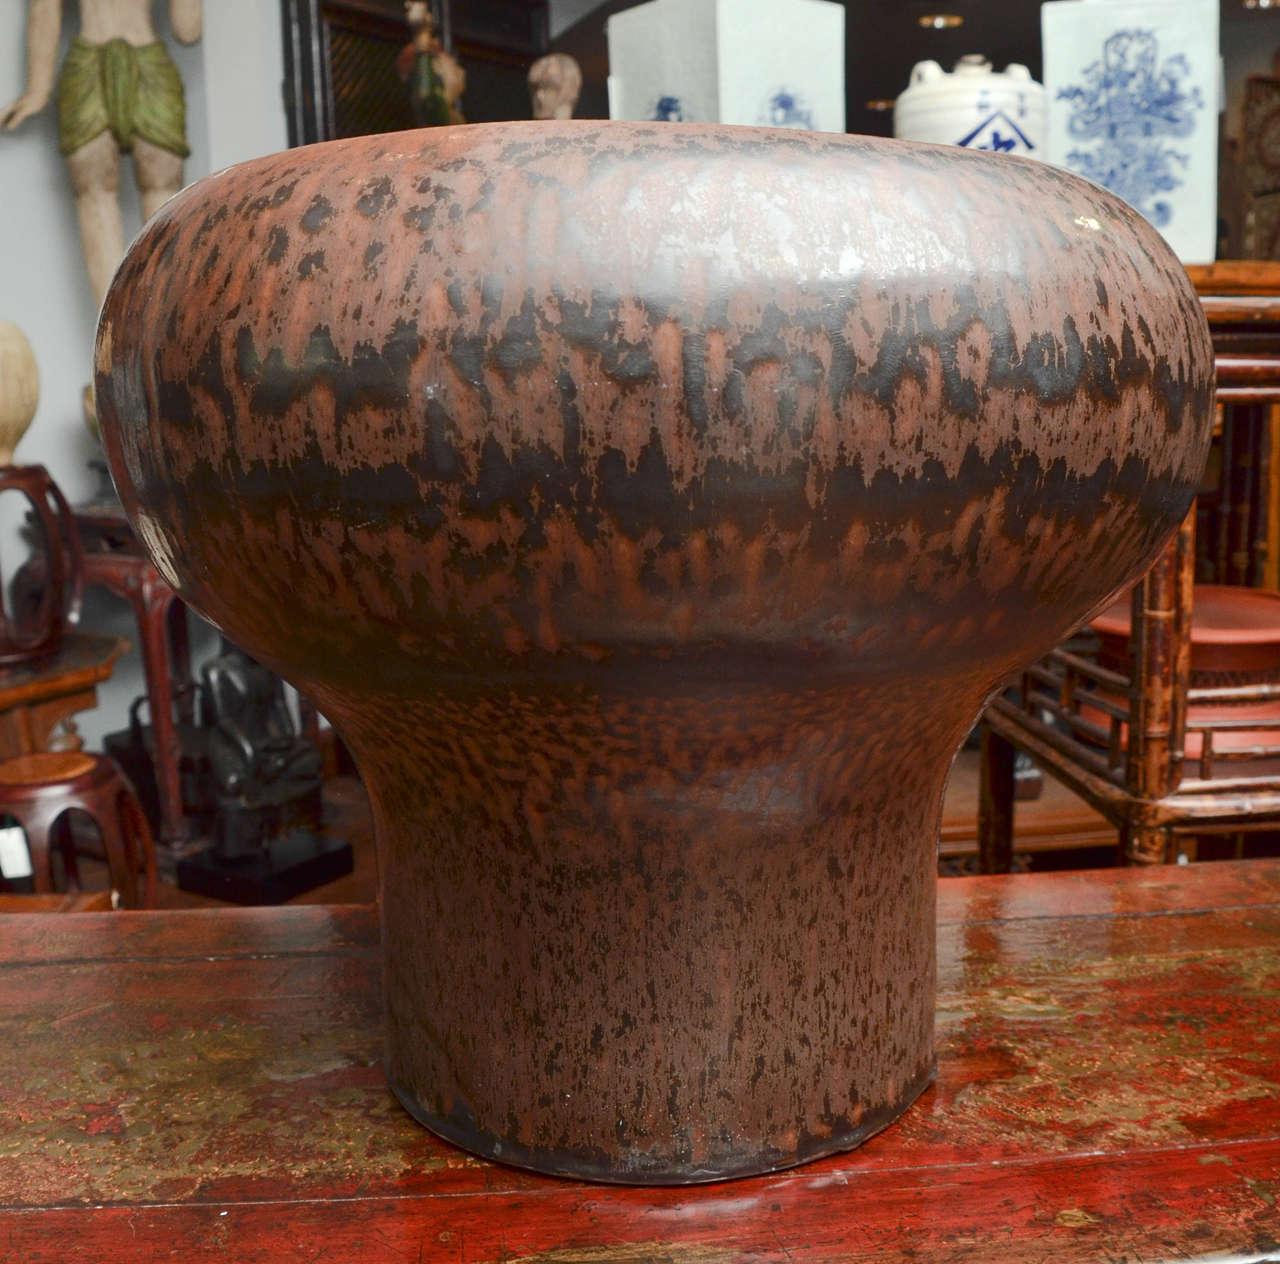 Contemporary Thai hand-thrown, fired and glazed ceramic vase or urn, centrepiece.